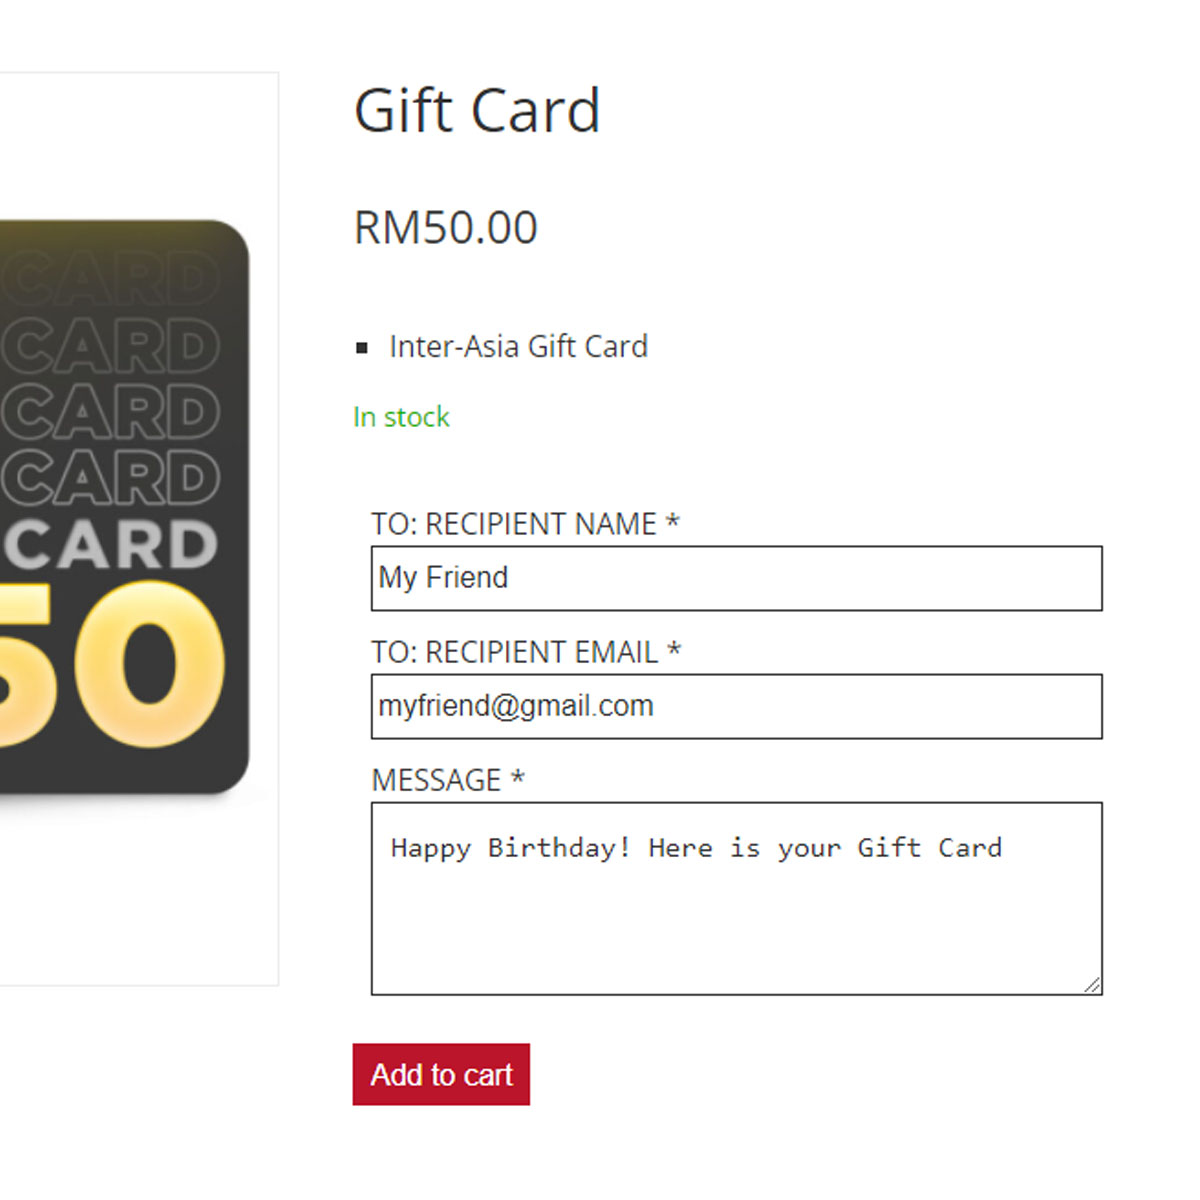 Inter-Asia Gift Card